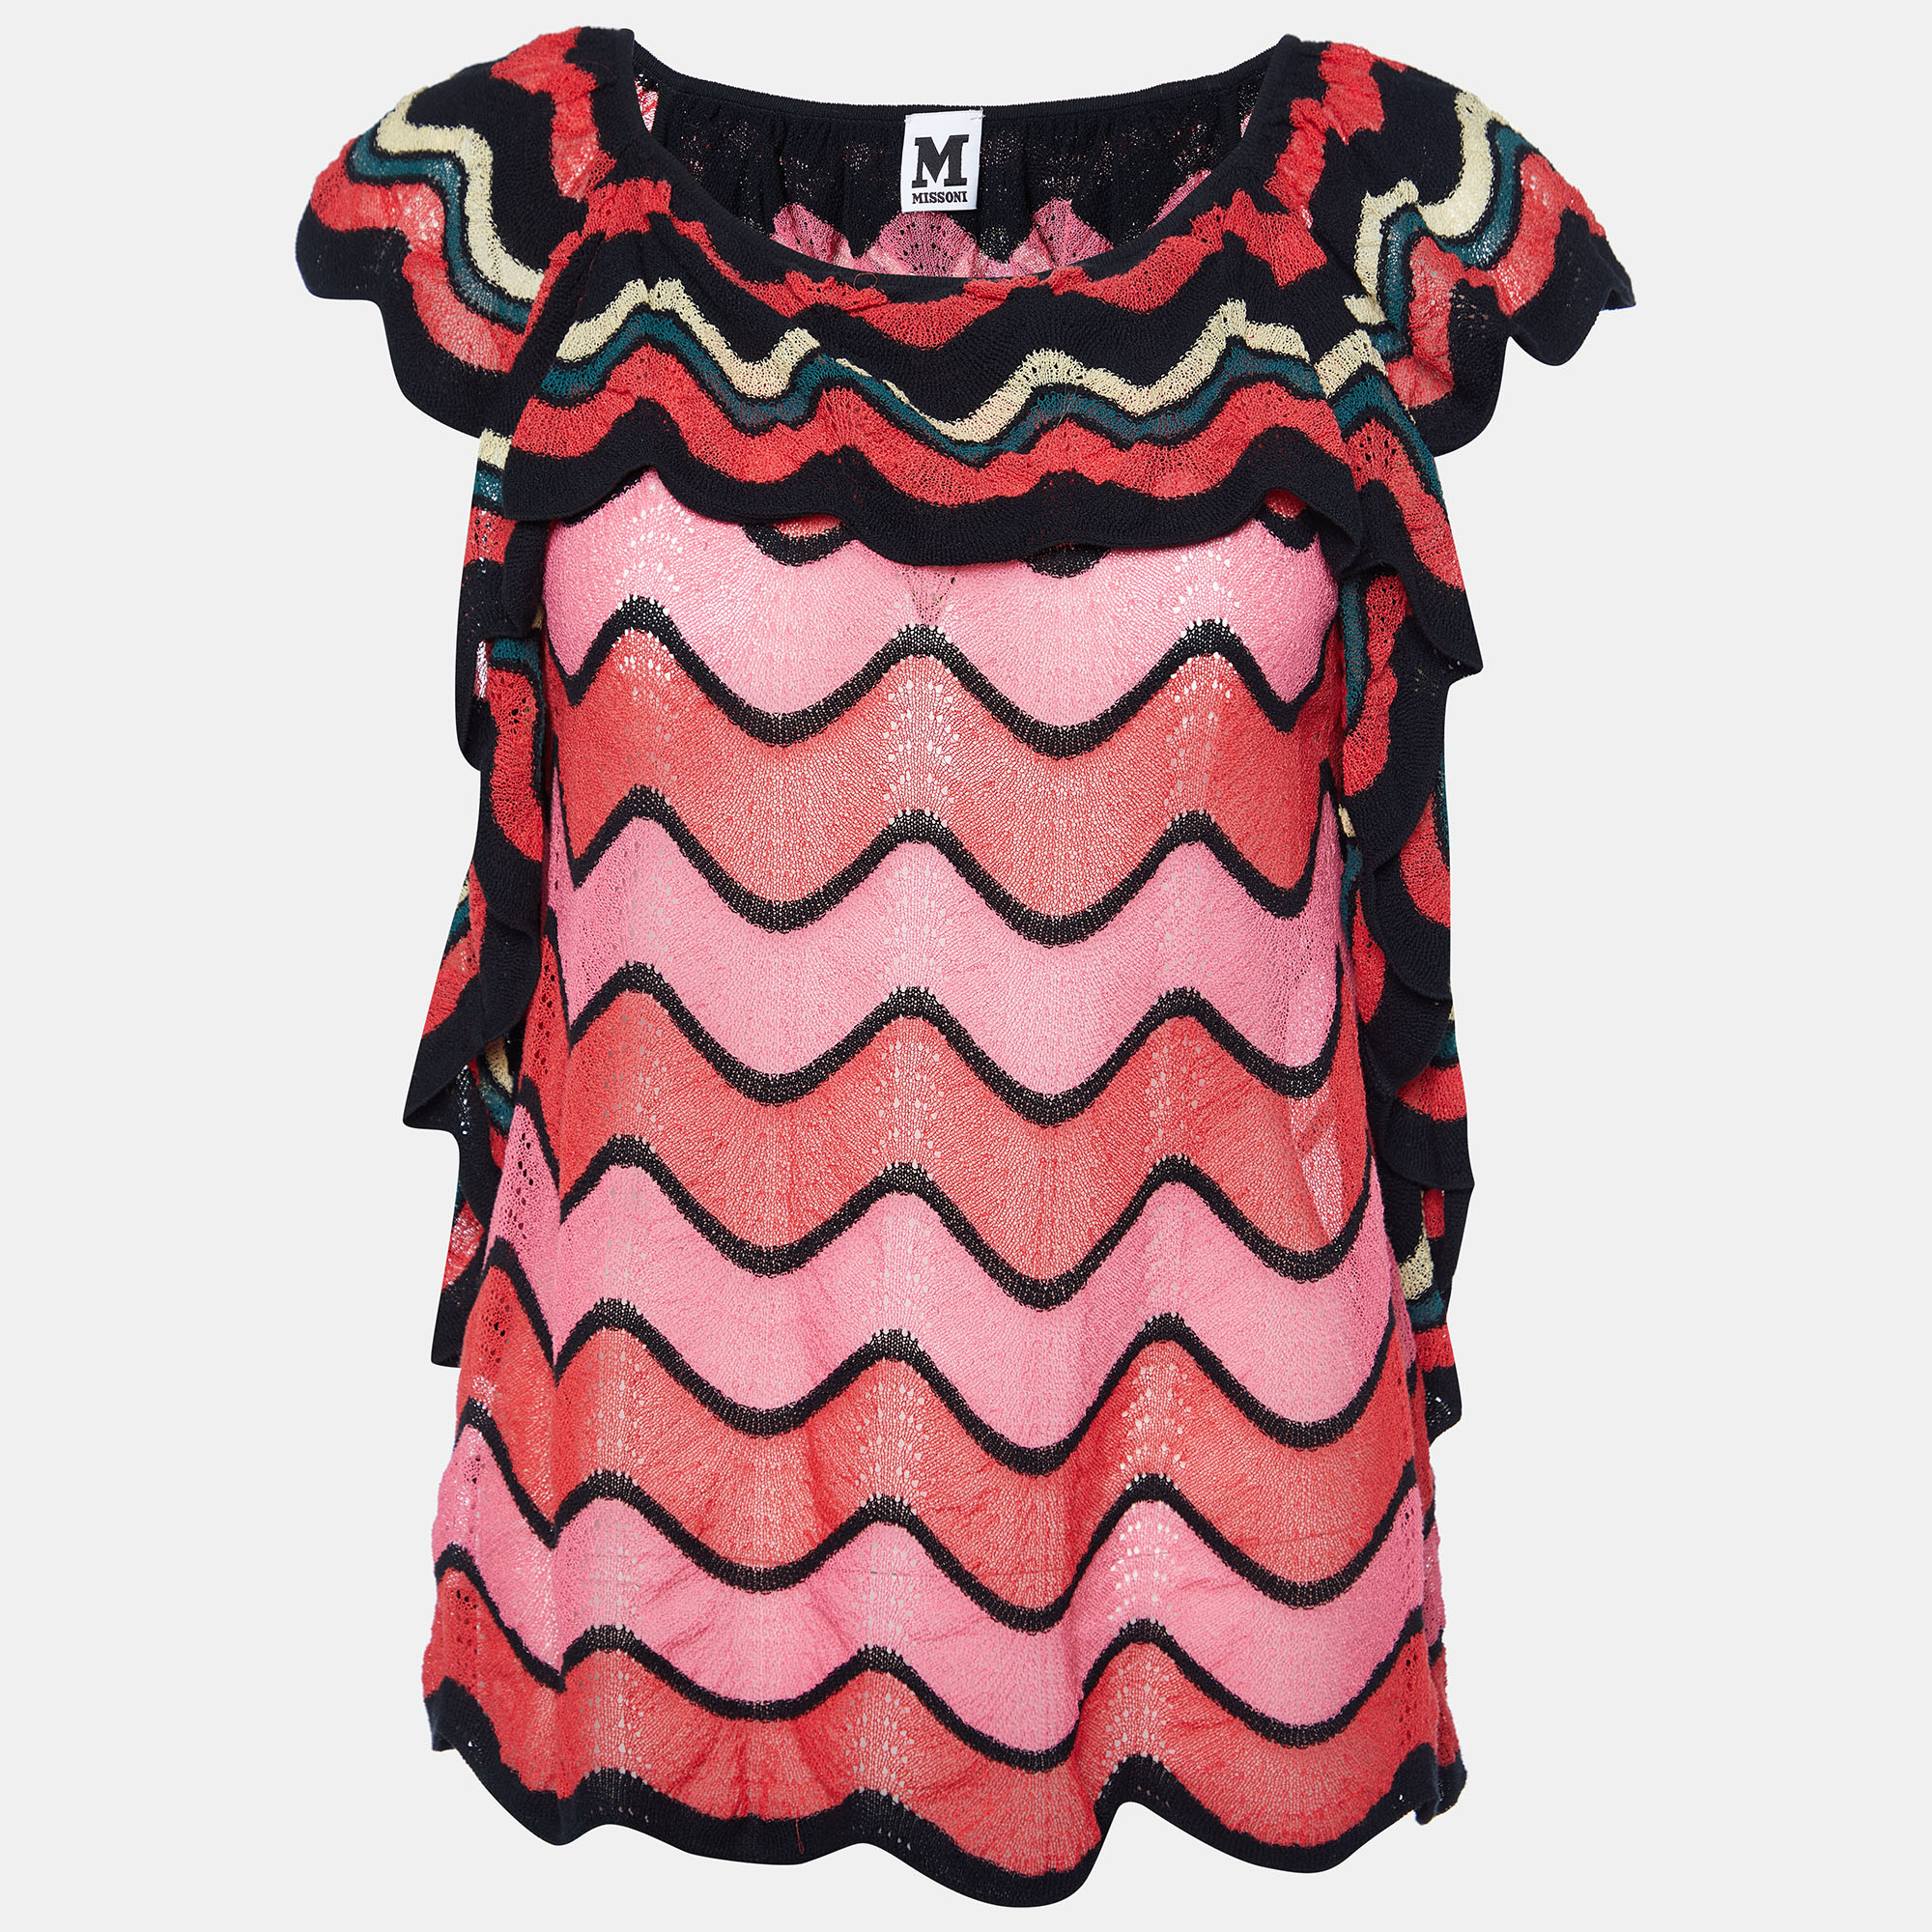 M Missoni Multicolor Patterned Ruffled Knit Top M